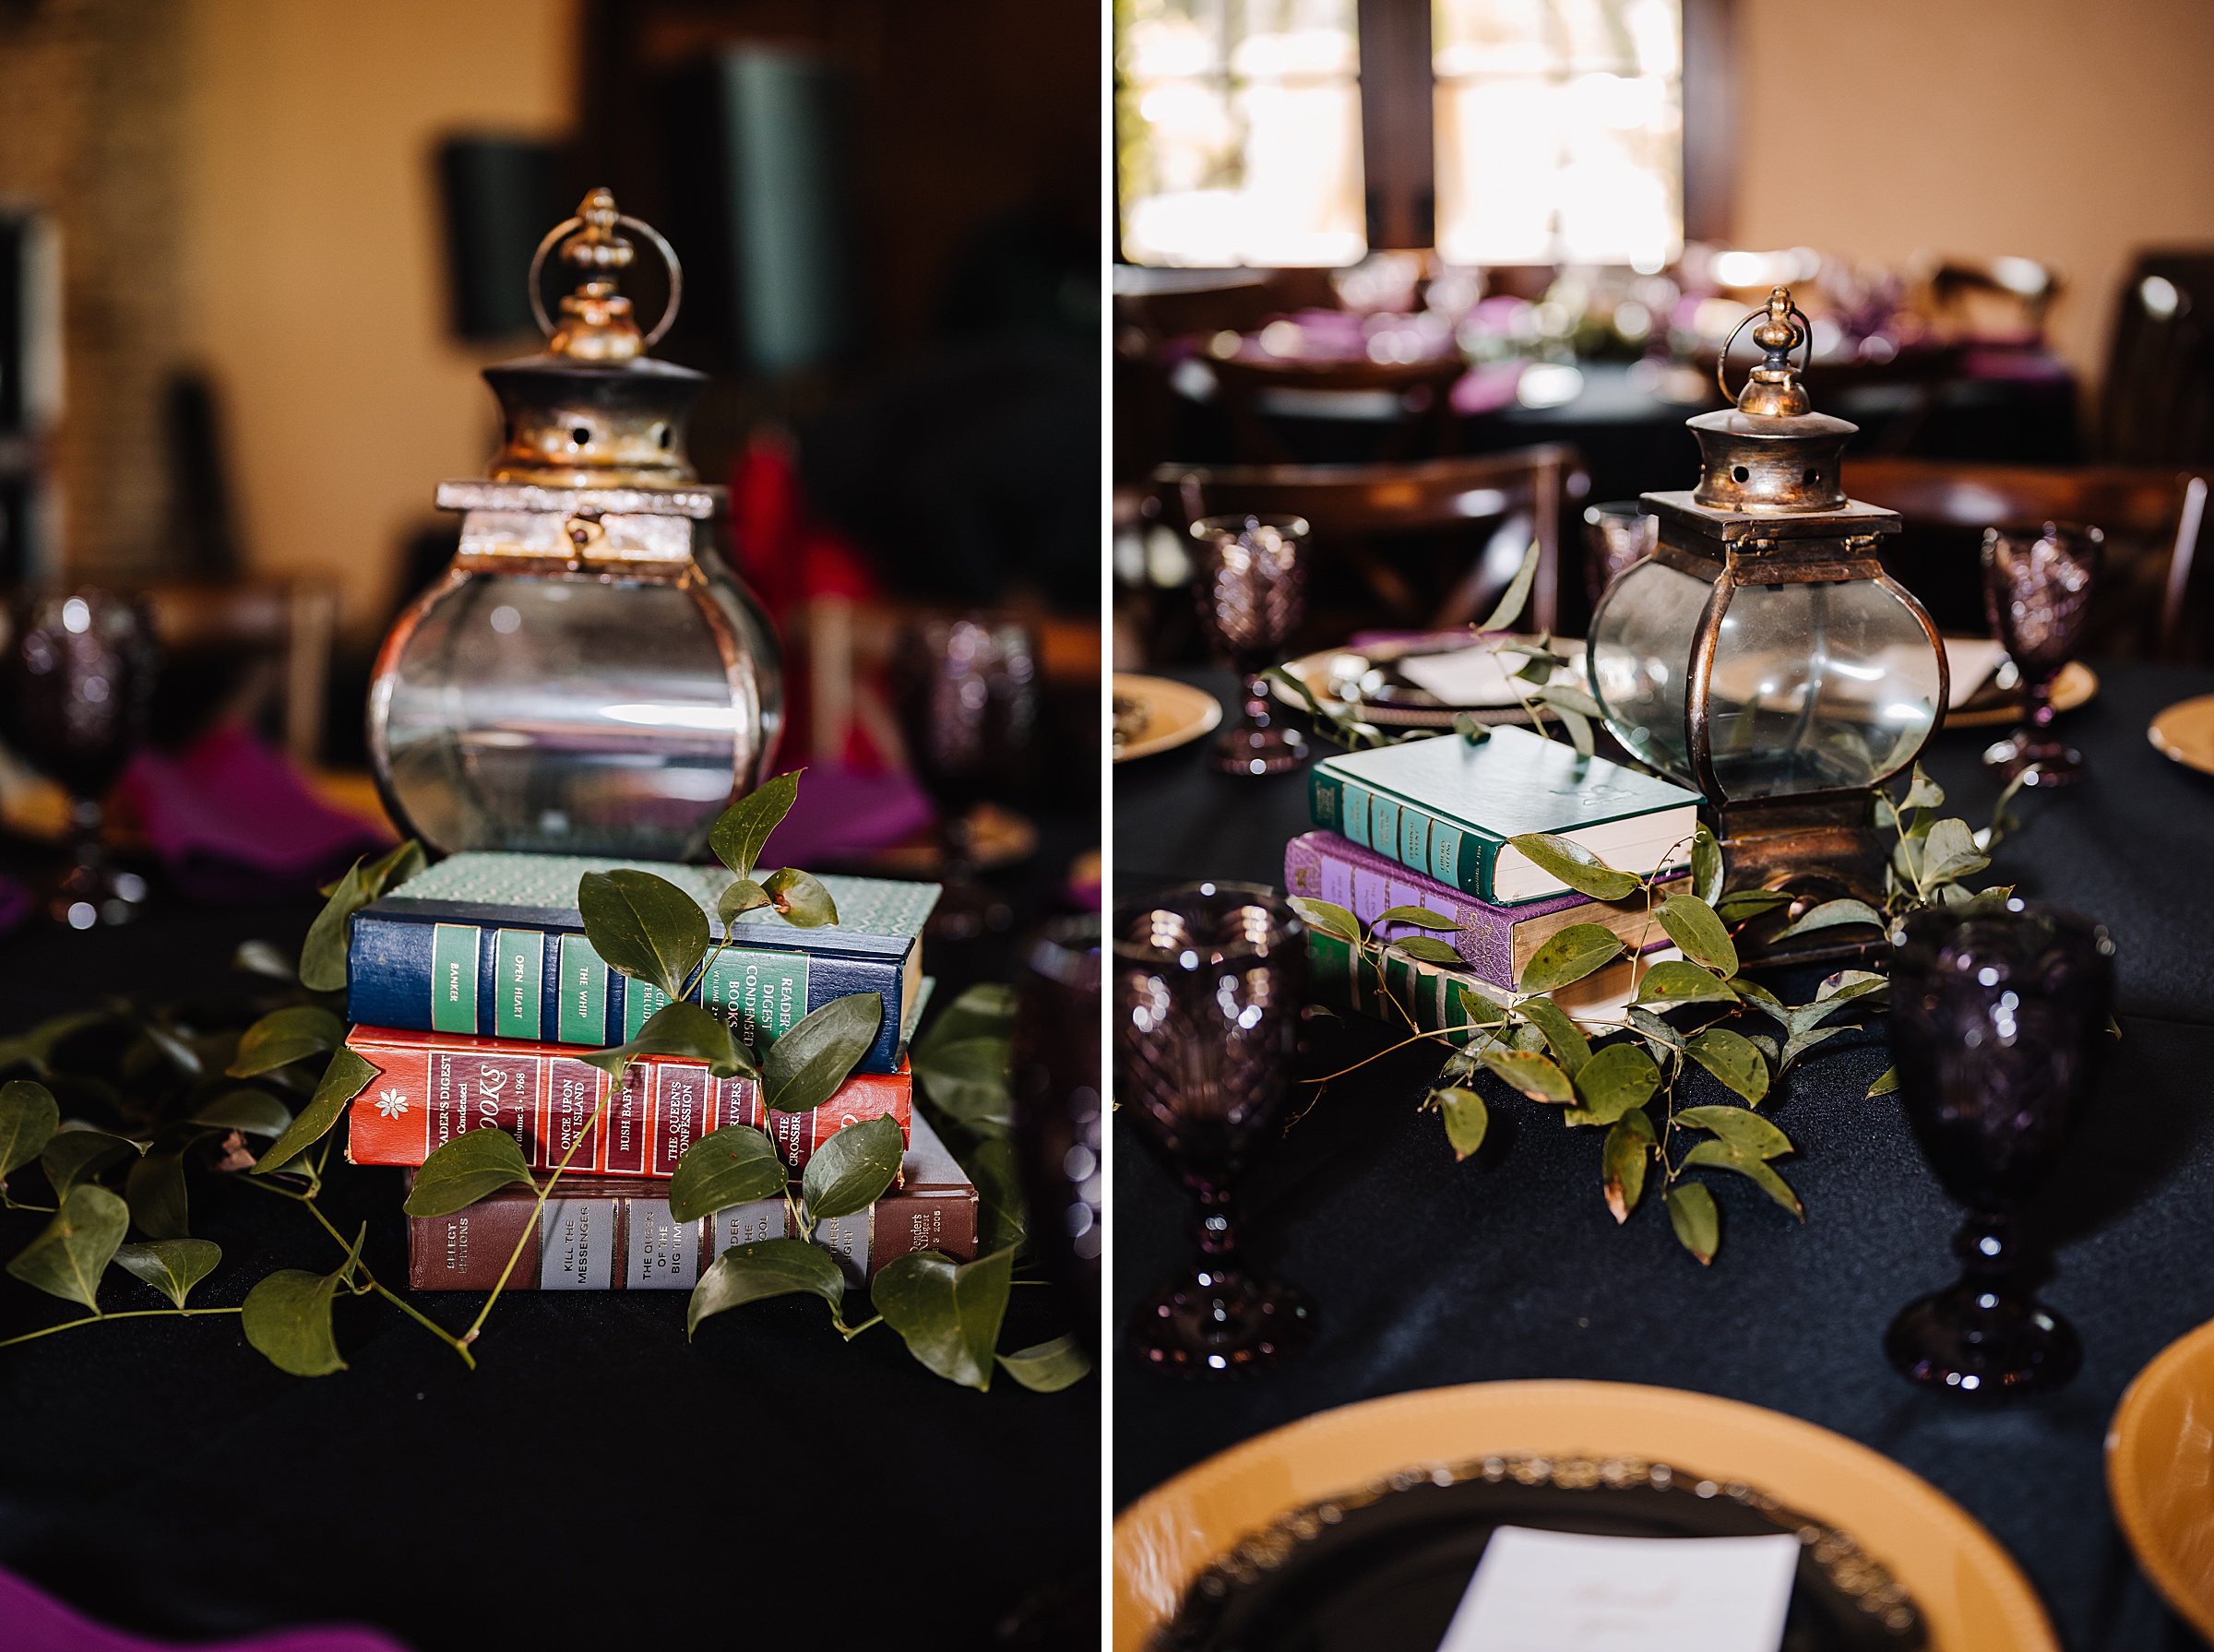 book and lantern table centerpieces at moody wedding